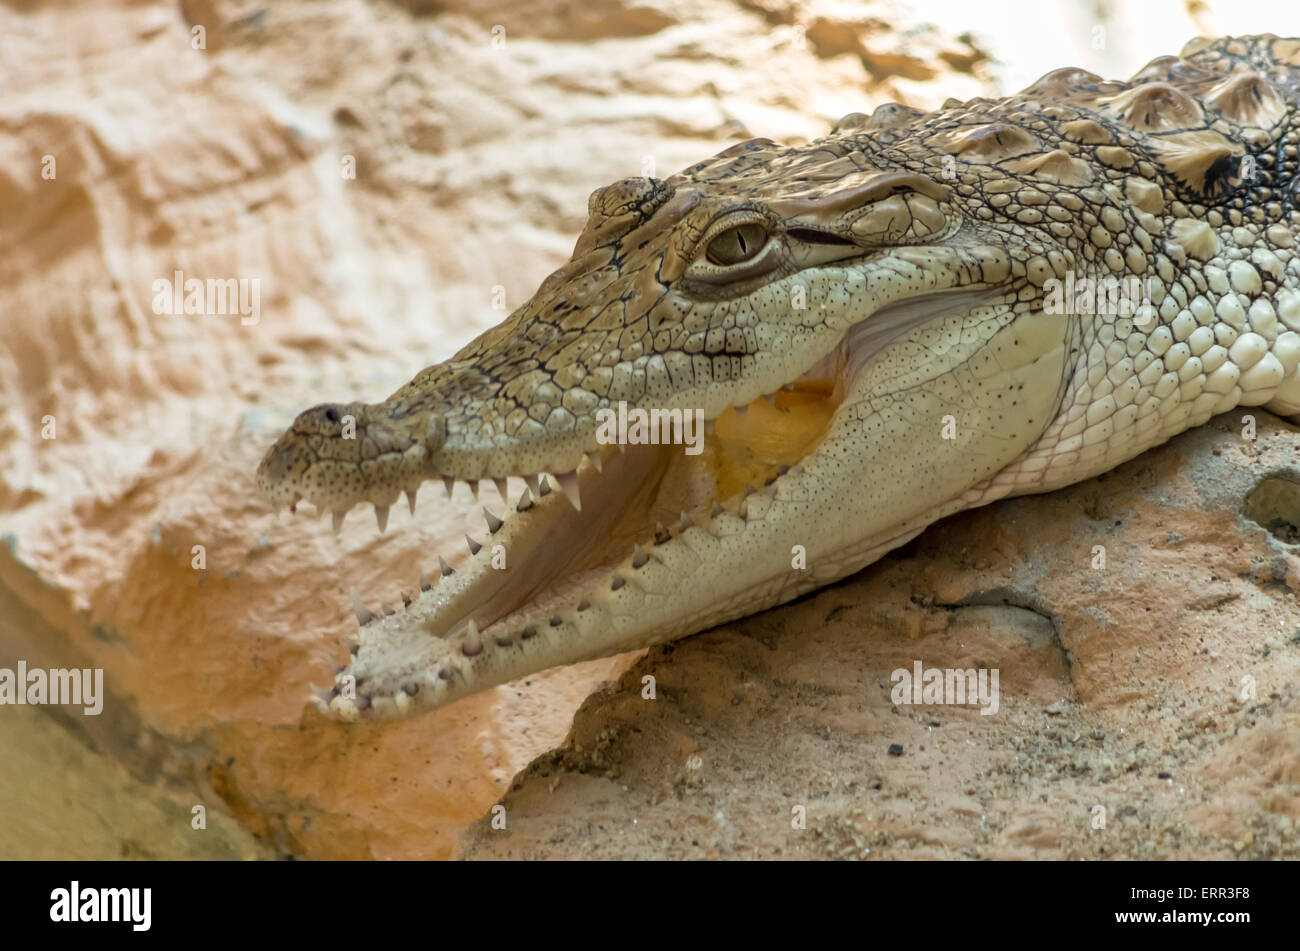 Close-up Of Young Alligator Alligator closeup on sand and rocks at zoo Stock Photo